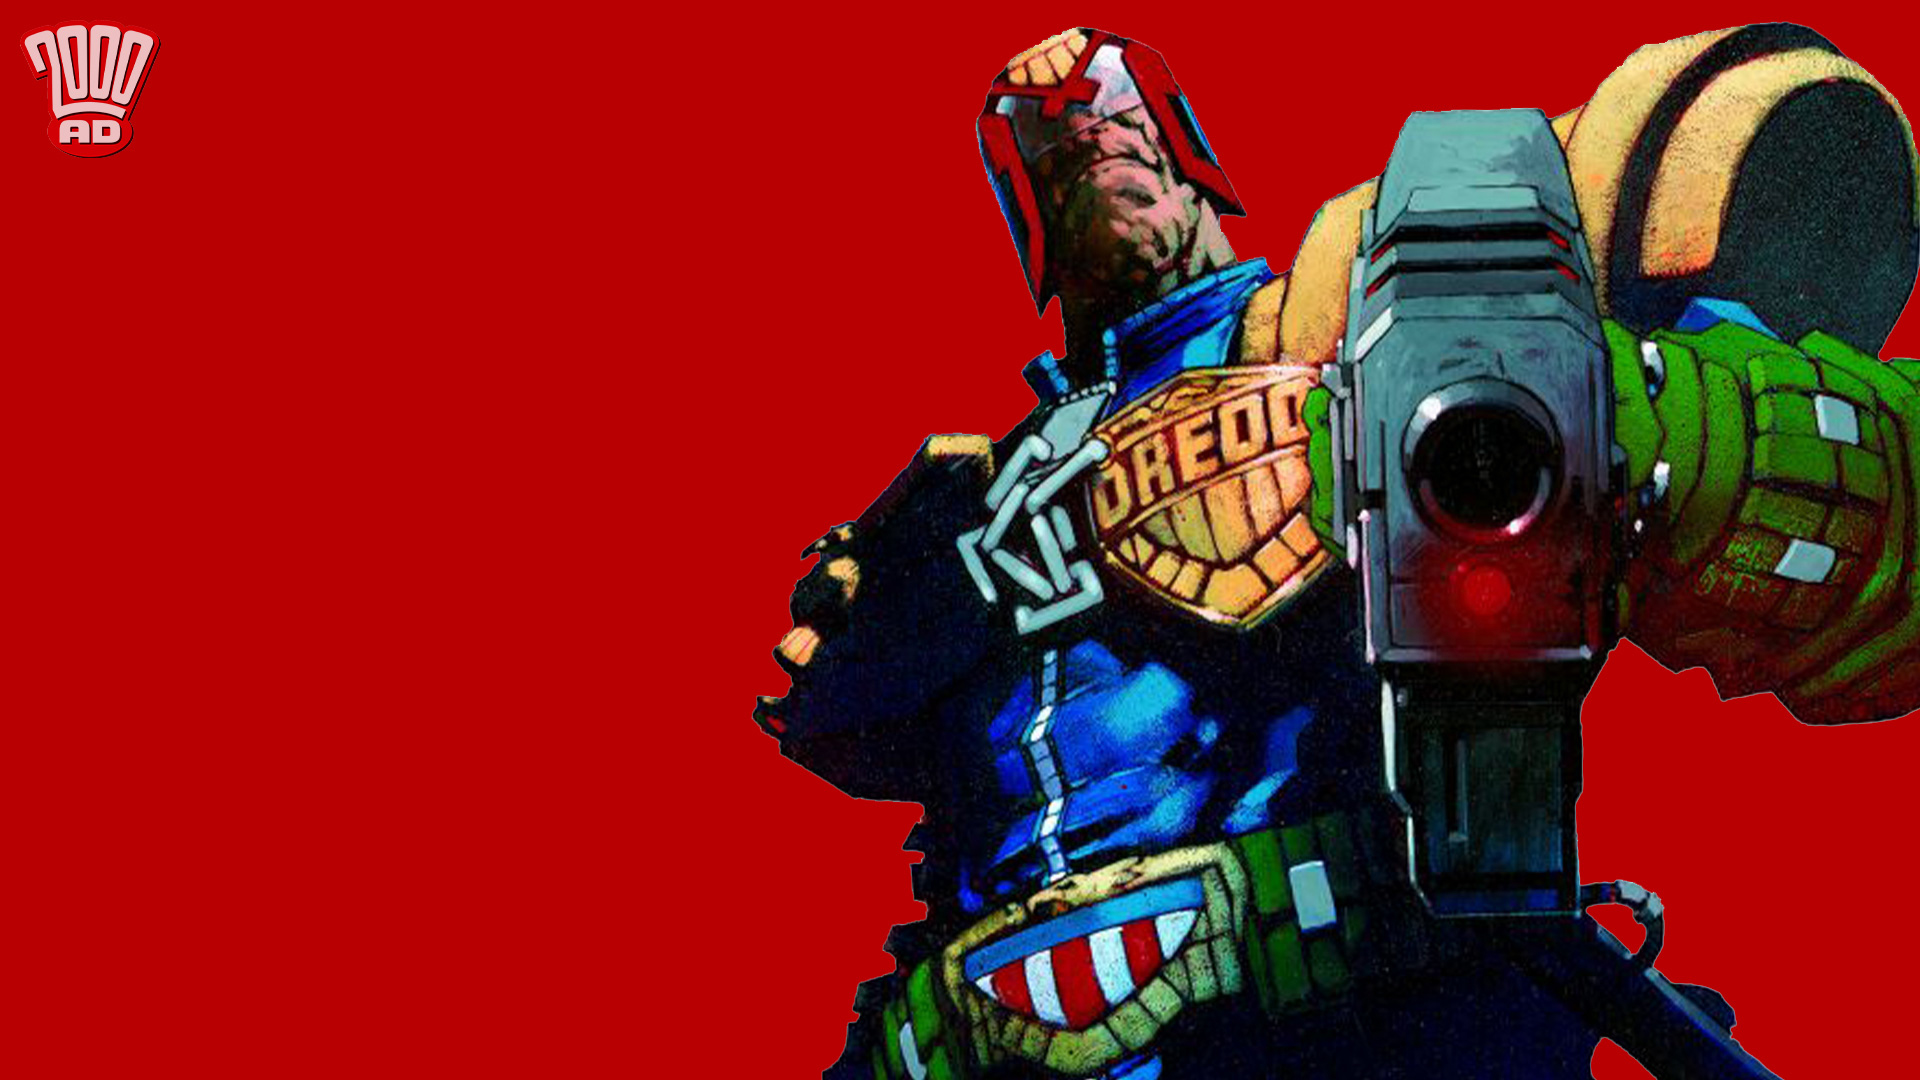 Download the latest 2000 AD Wednesday wallpaper - it's the law!